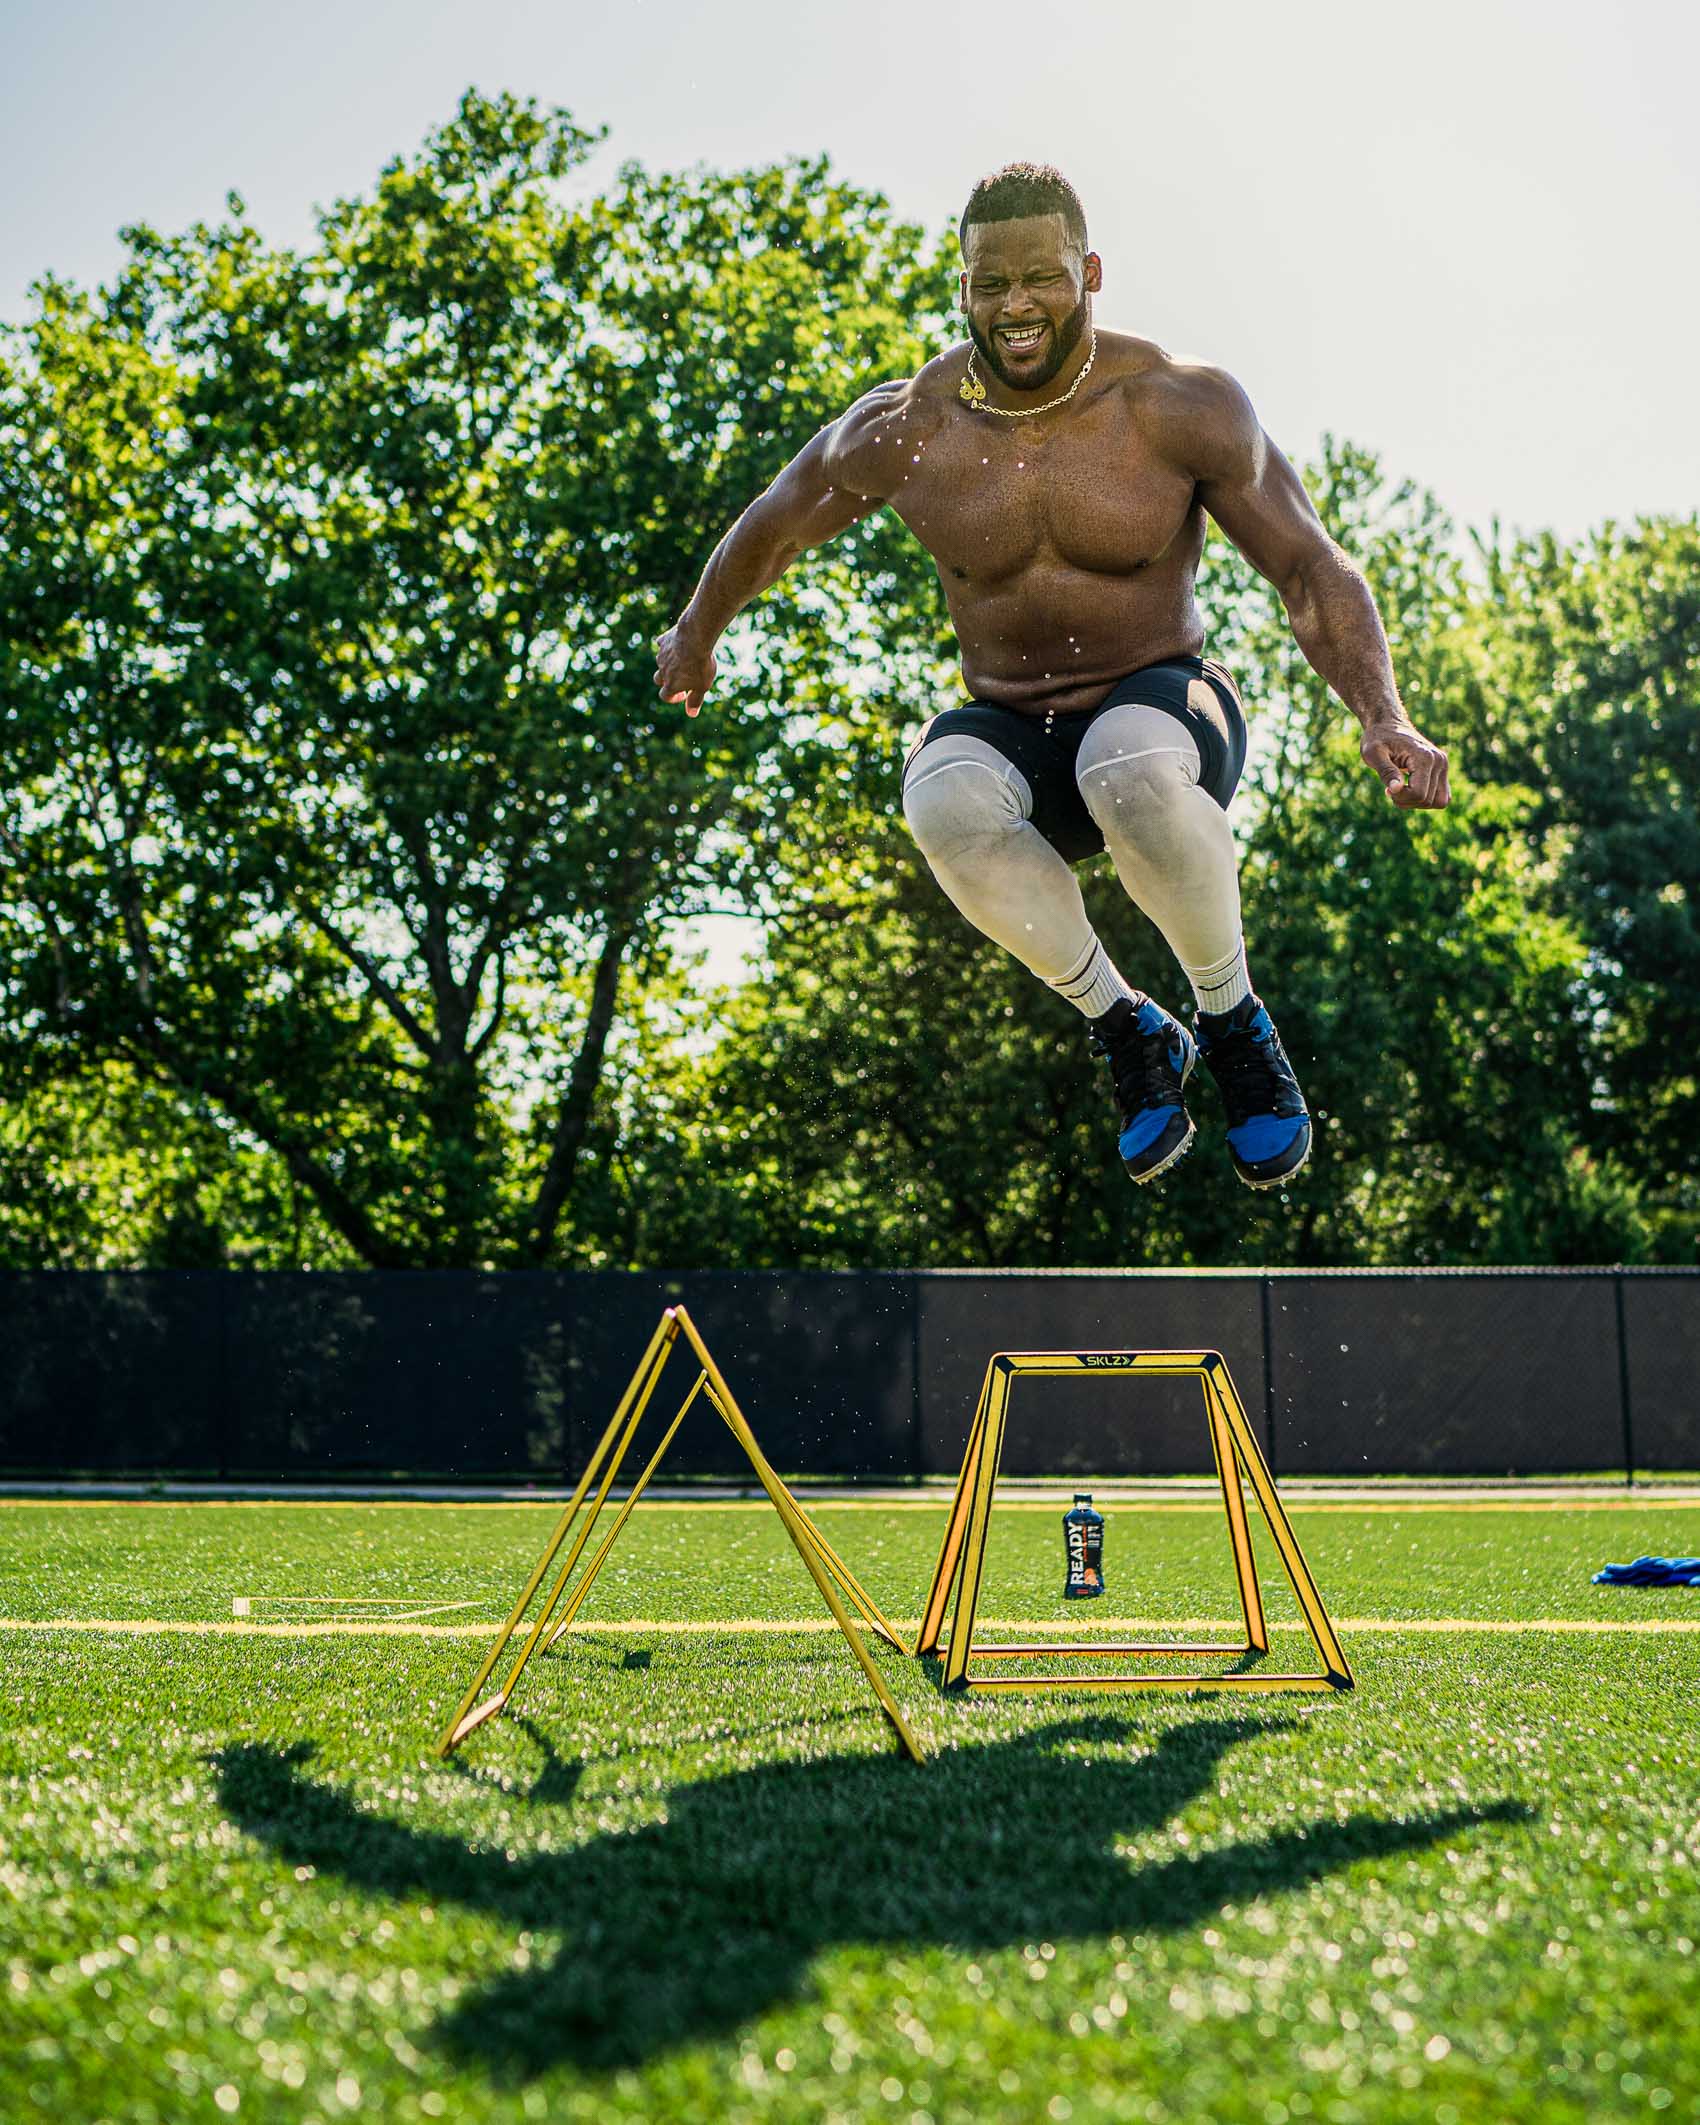 NFL DEFENSIVE PLAYER OF THE YEAR LOS ANGELES RAMS ATHLETE AARON DONALD BY COMMERCIAL ADVERTISING PHOTOGRAPHER SHAWN HUBBARD BASED IN BALTIMORE MD WASHINGTON DC